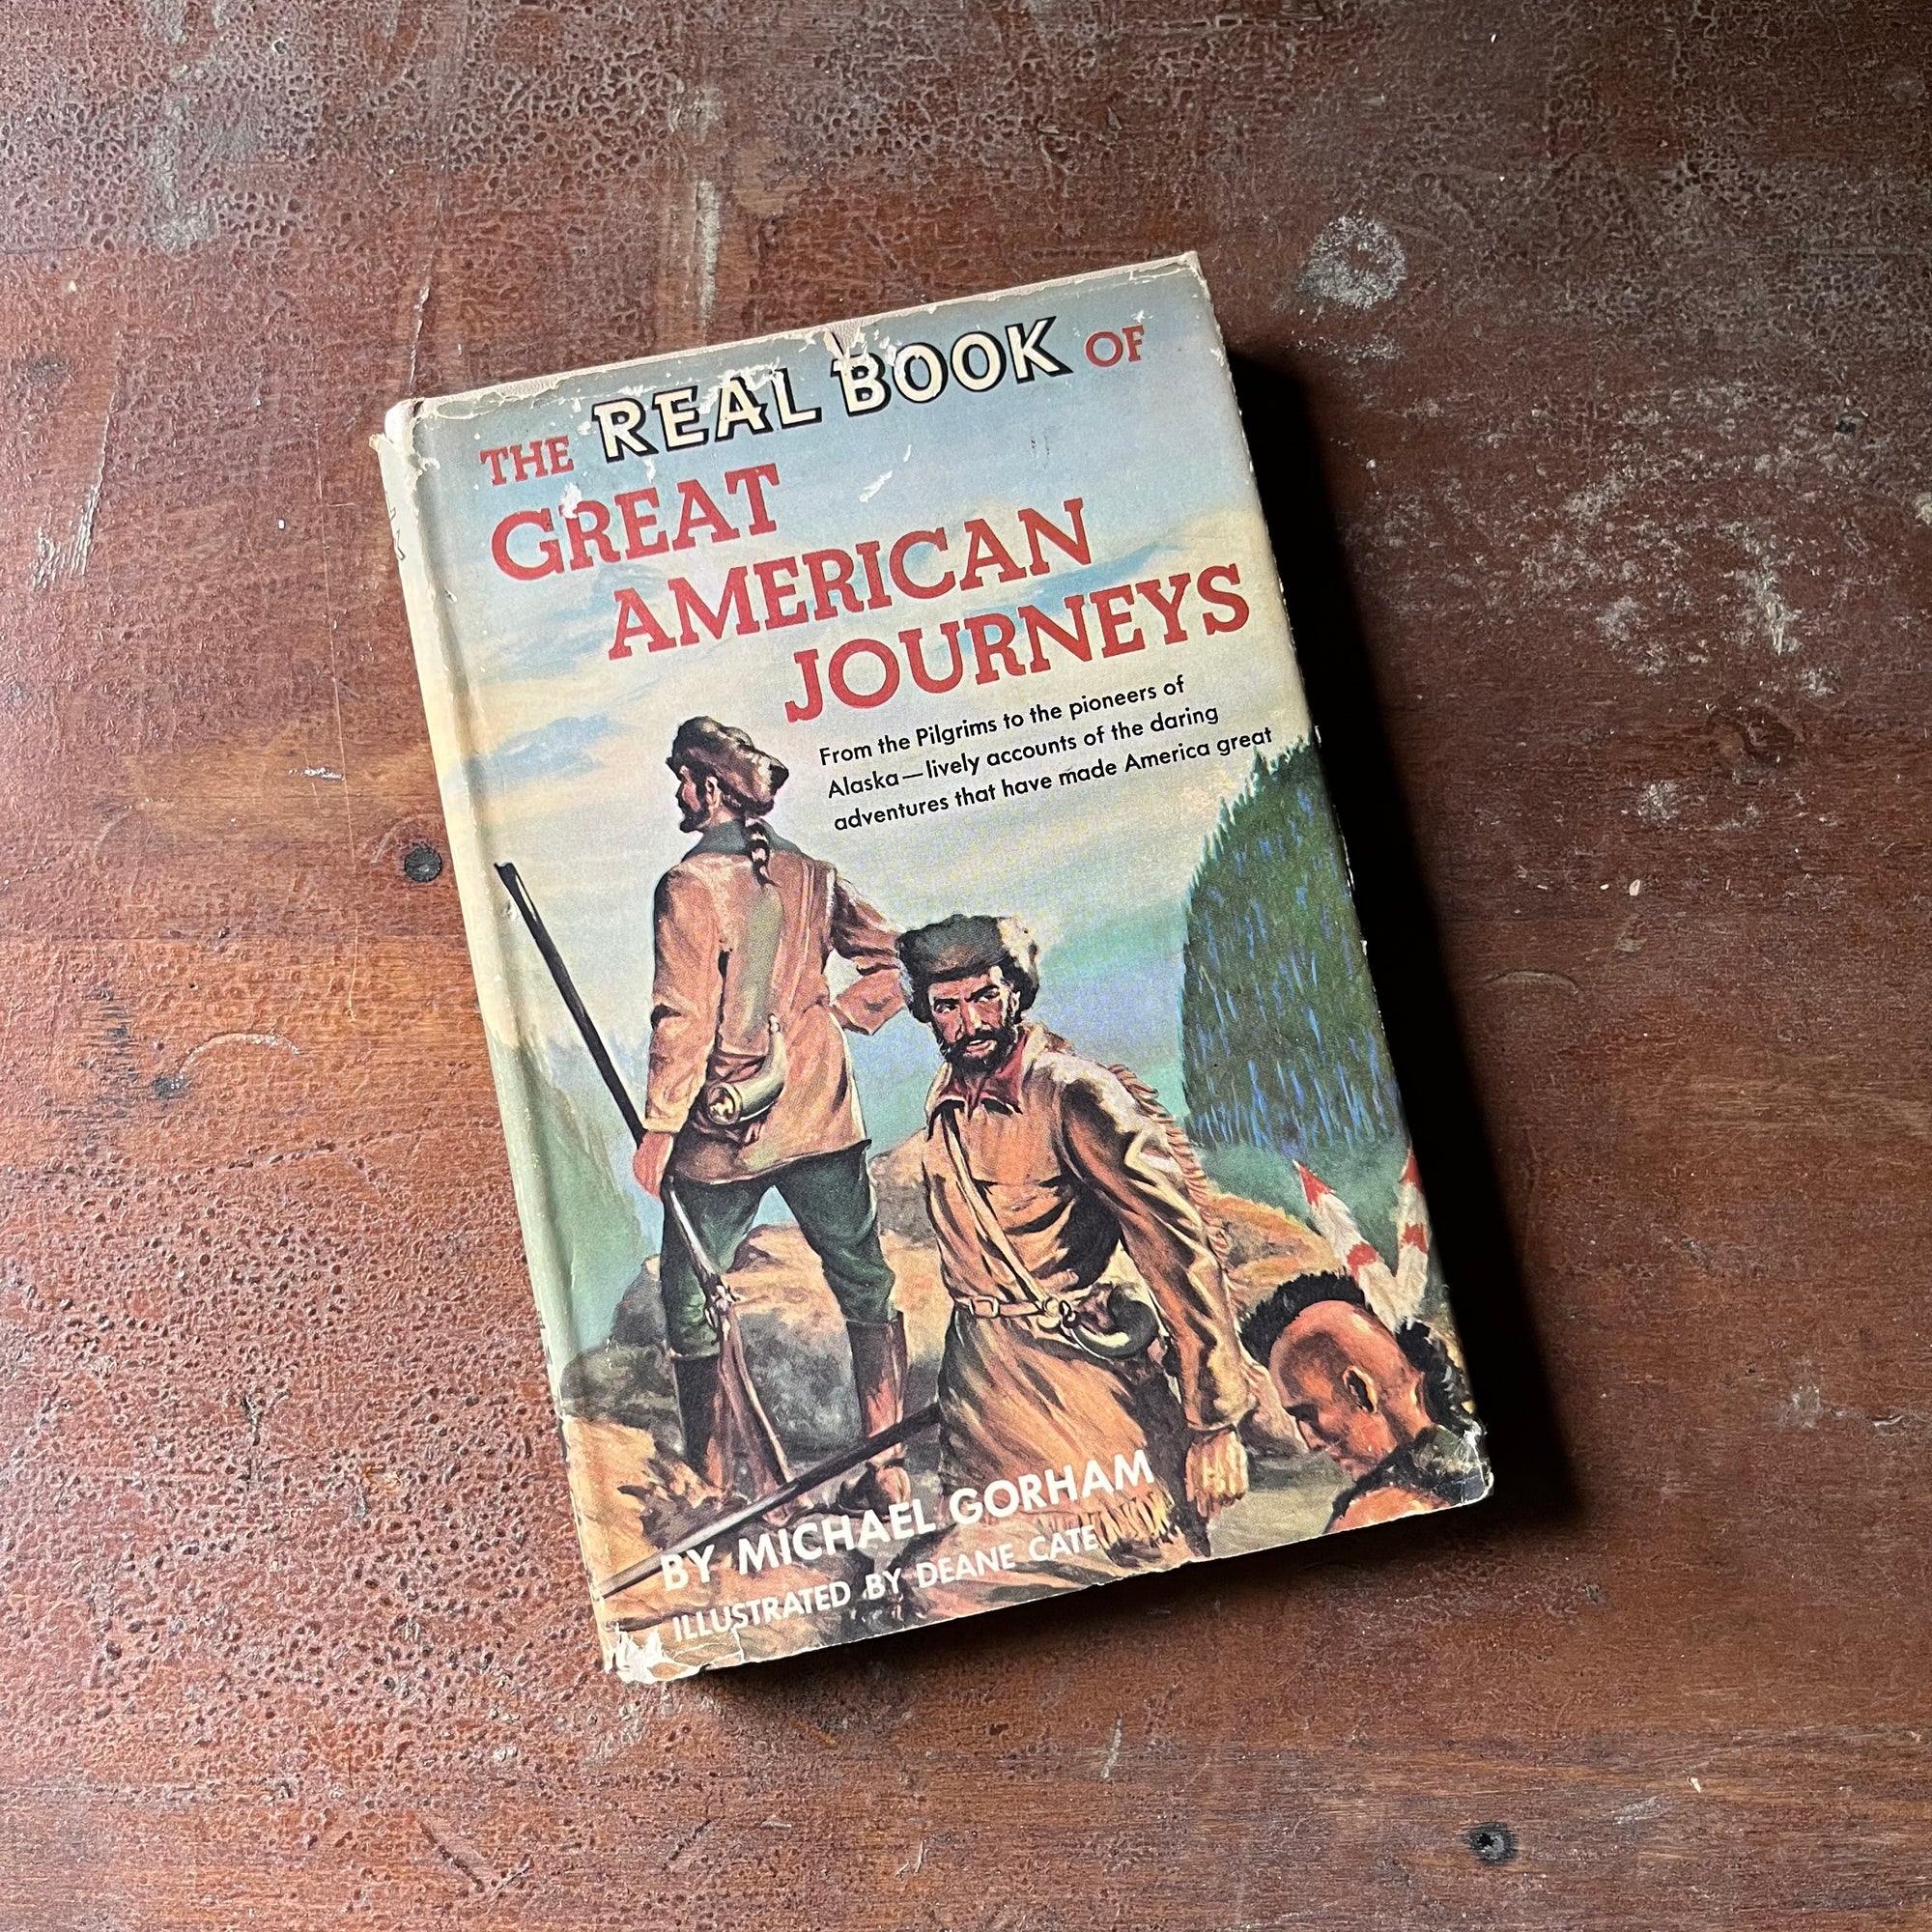 vintage children's book, vintage children's history book, vintage chapter book , The Real Book Series - The Real Book of Great American Journeys written by Michael Gorham & illustrated by Deane Cate - view of the dust jacket's front cover with an illustration of Lewis & Clark along with a native American male